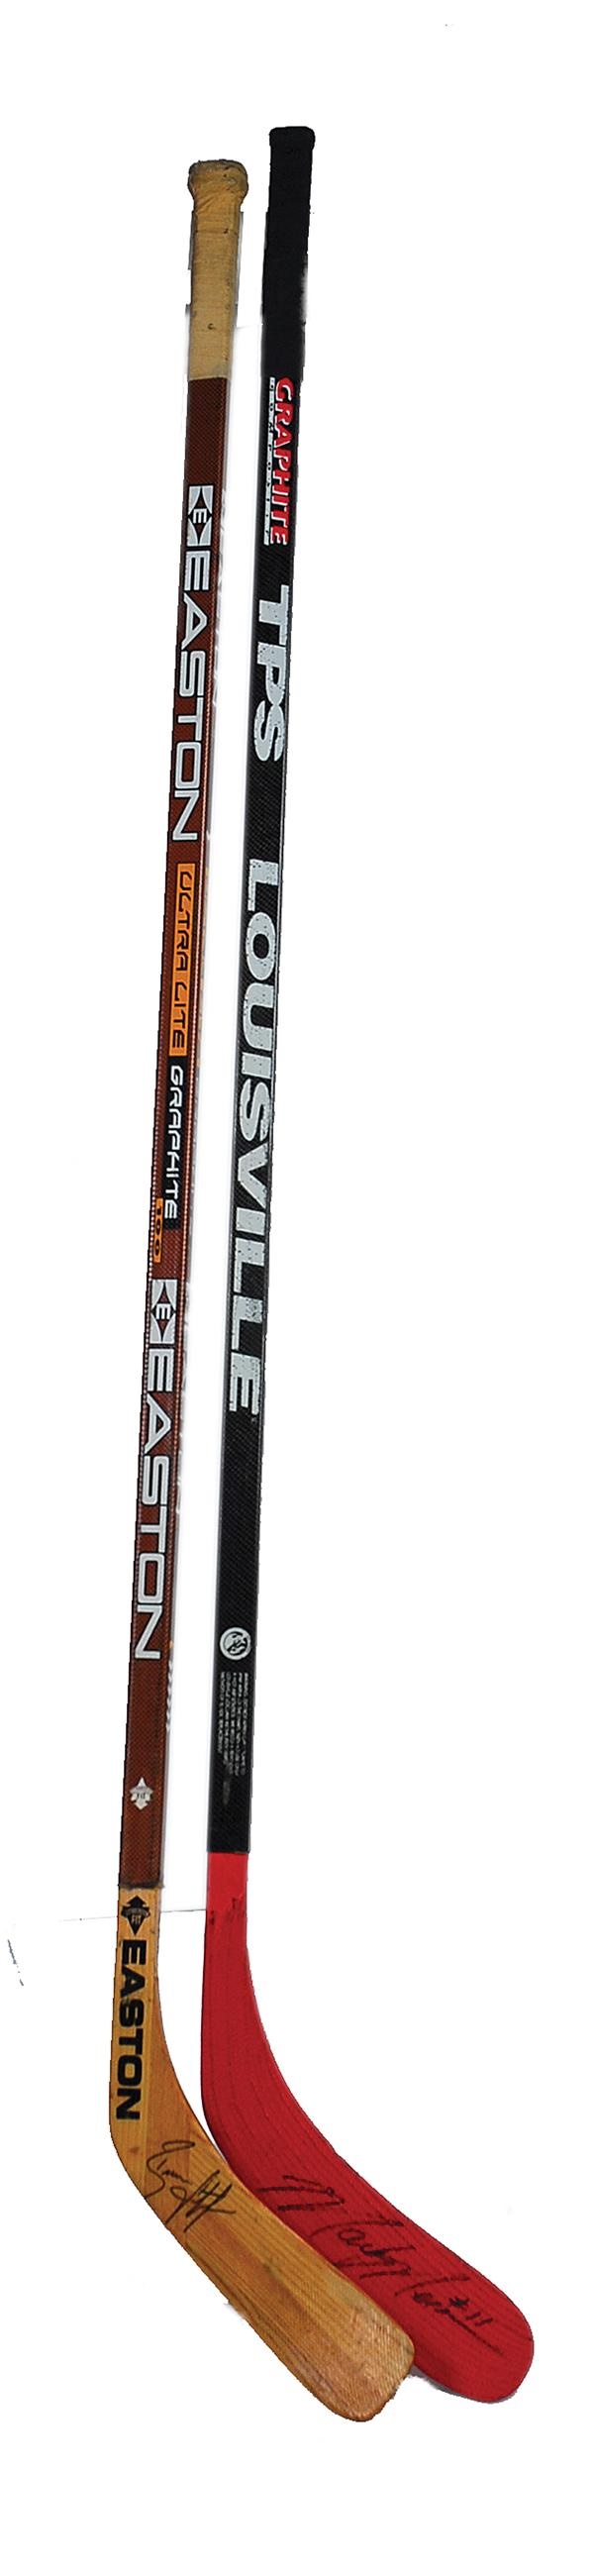 Hockey Equipment - Brian Leetch and Mark Messier Signed Game Used Sticks